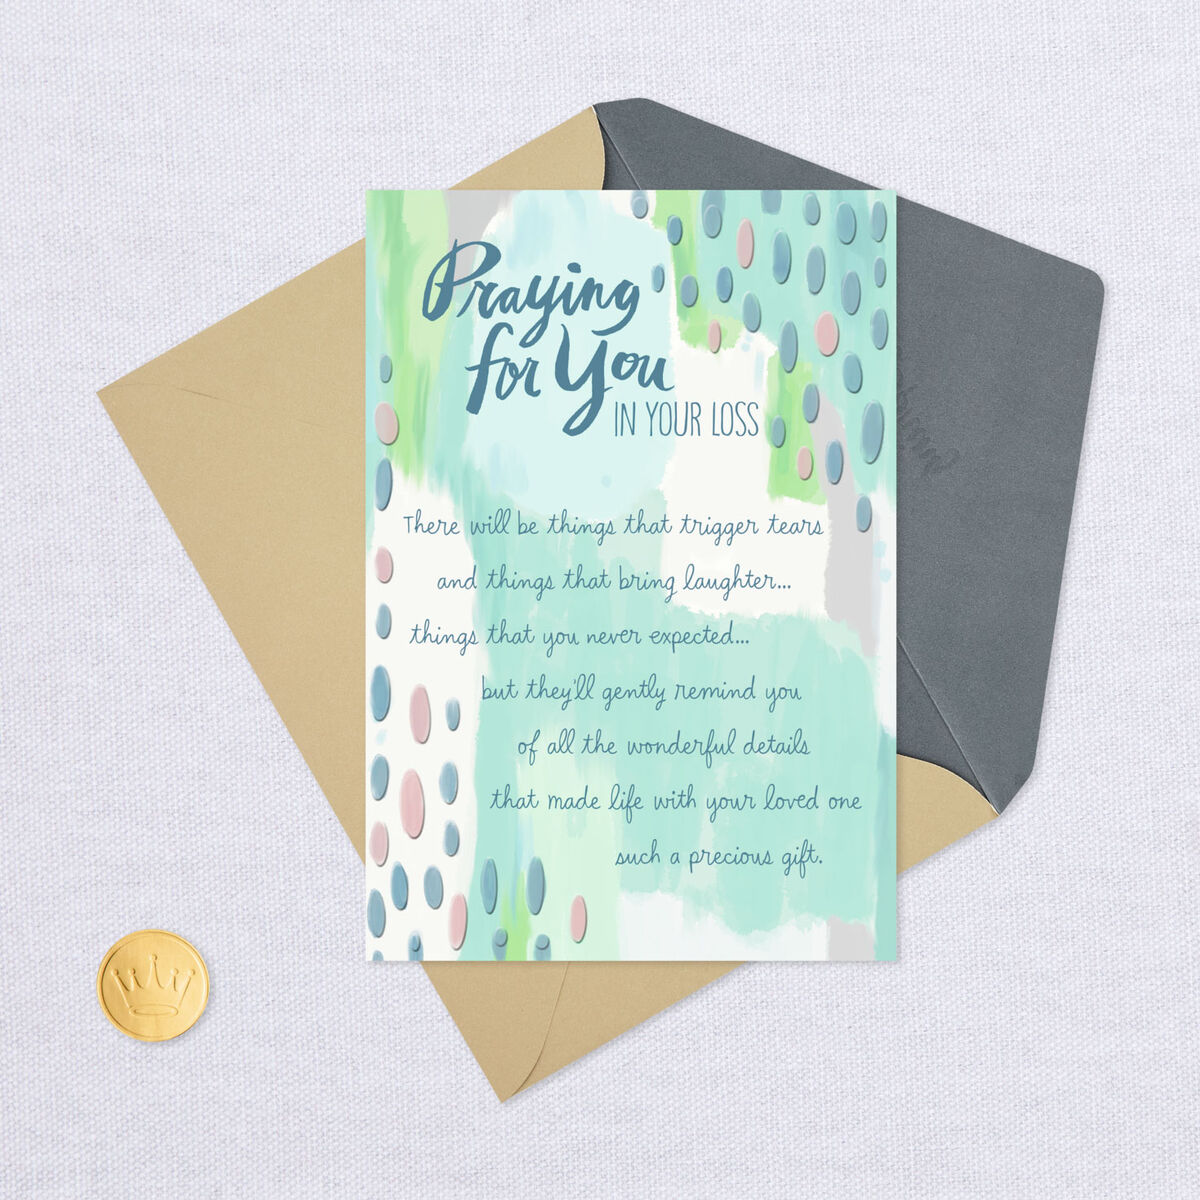 Praying For You In Your Loss Religious Sympathy Card Greeting Cards Hallmark